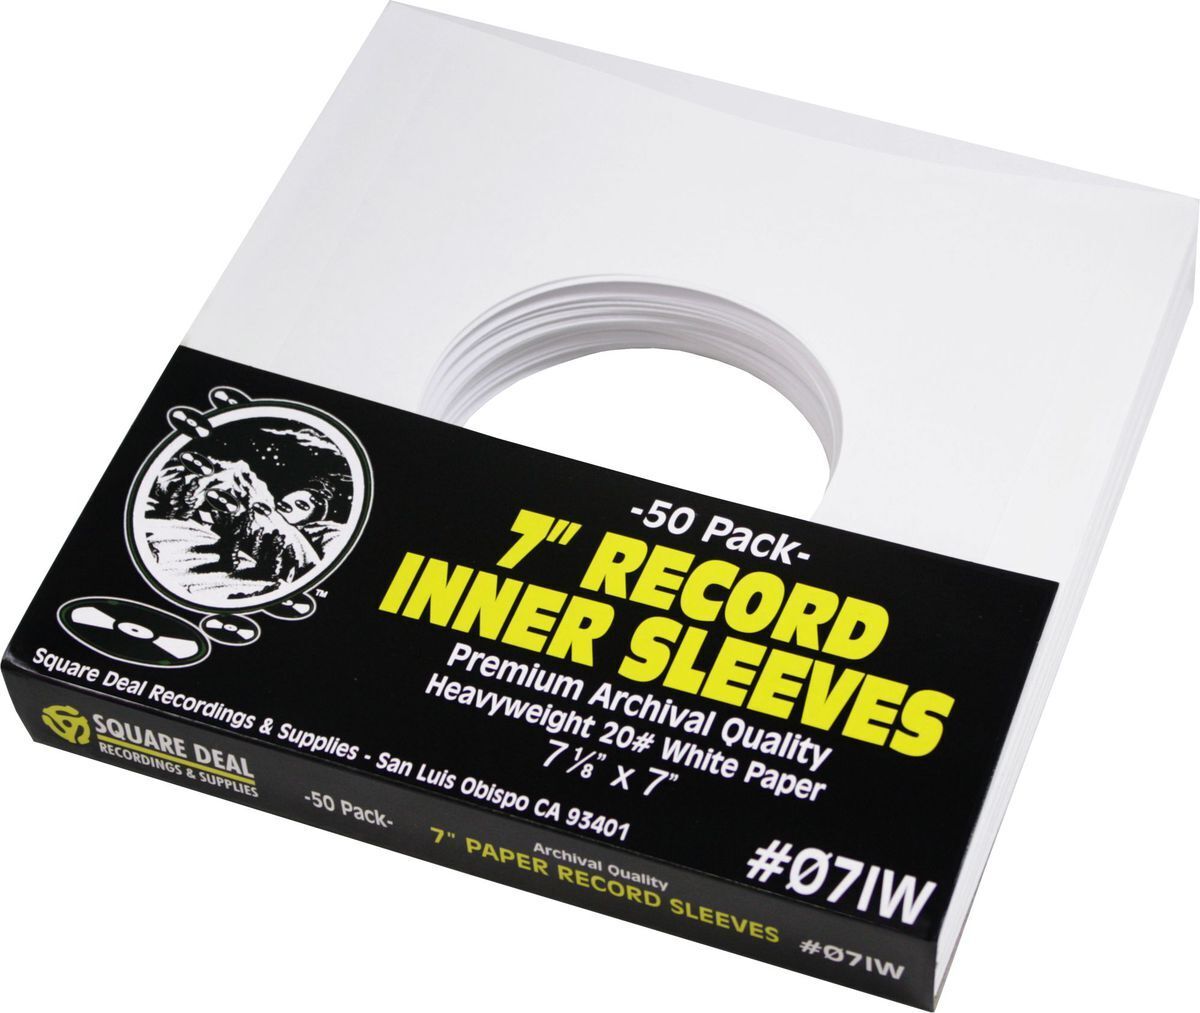 (50) 7" Record Inner Sleeves - White ARCHIVAL Paper ACID FREE 45rpm - #07IW Square Deal Recordings & Supplies 07IW